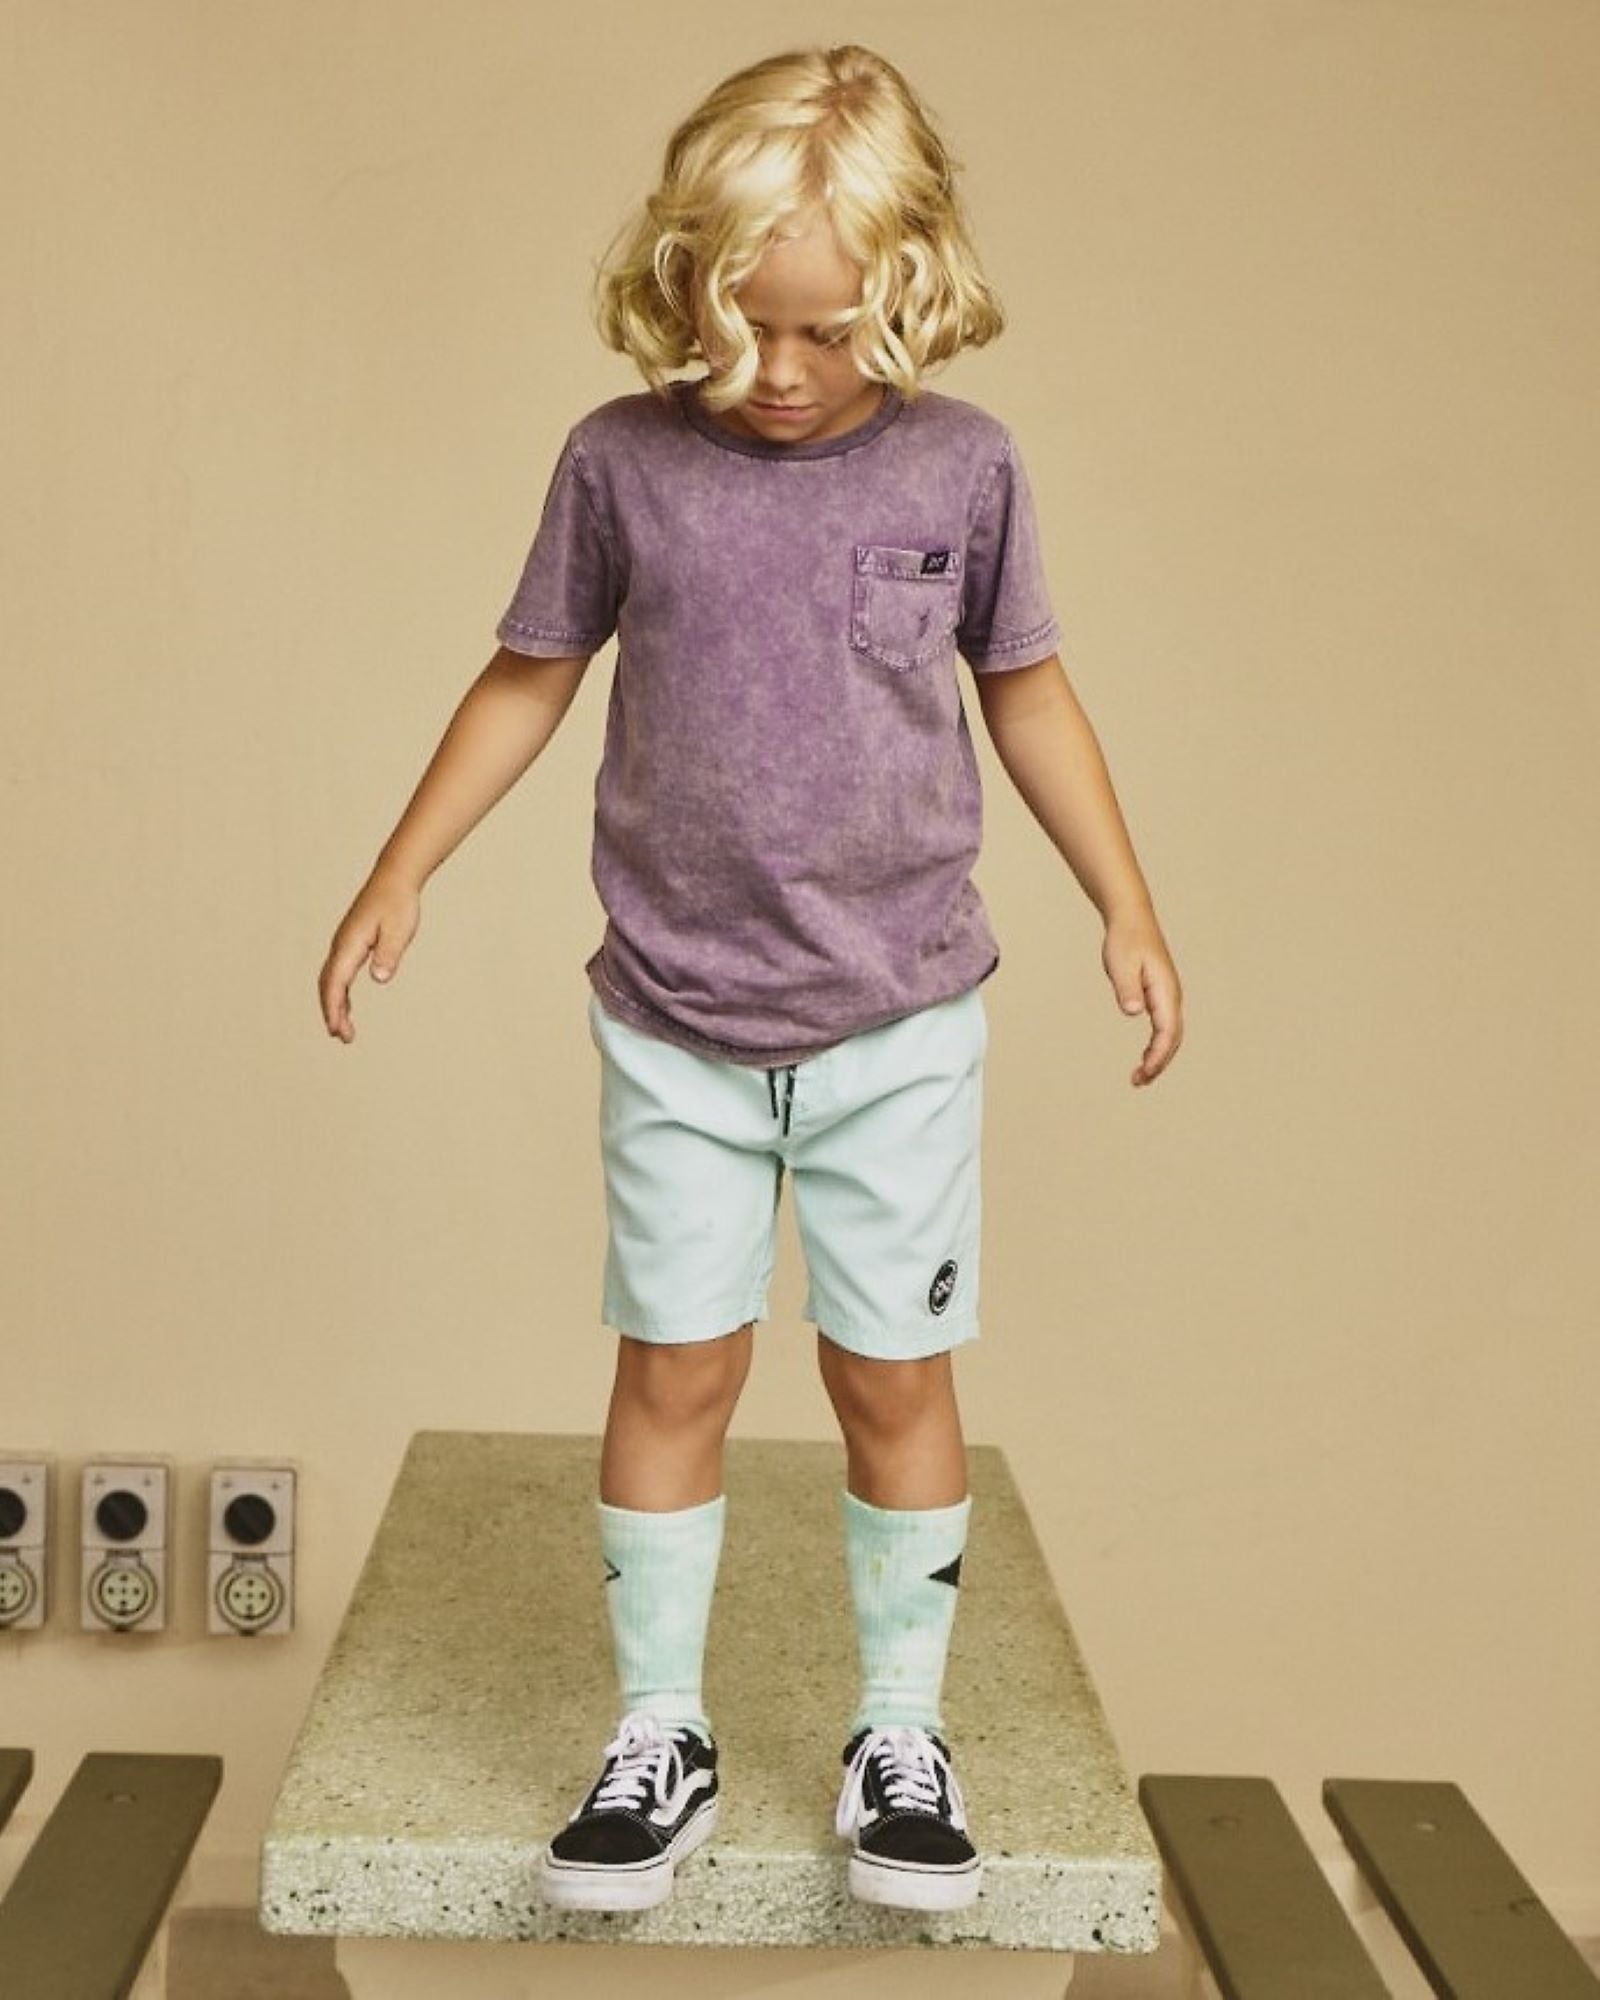 Alphabet Soup's Teen Go To Pocket Tee for boys aged 8-16. Featuring 100% cotton jersey in an acid wash purple colourway, short sleeves, ribbed crew neck, acid wash and pocket chest.